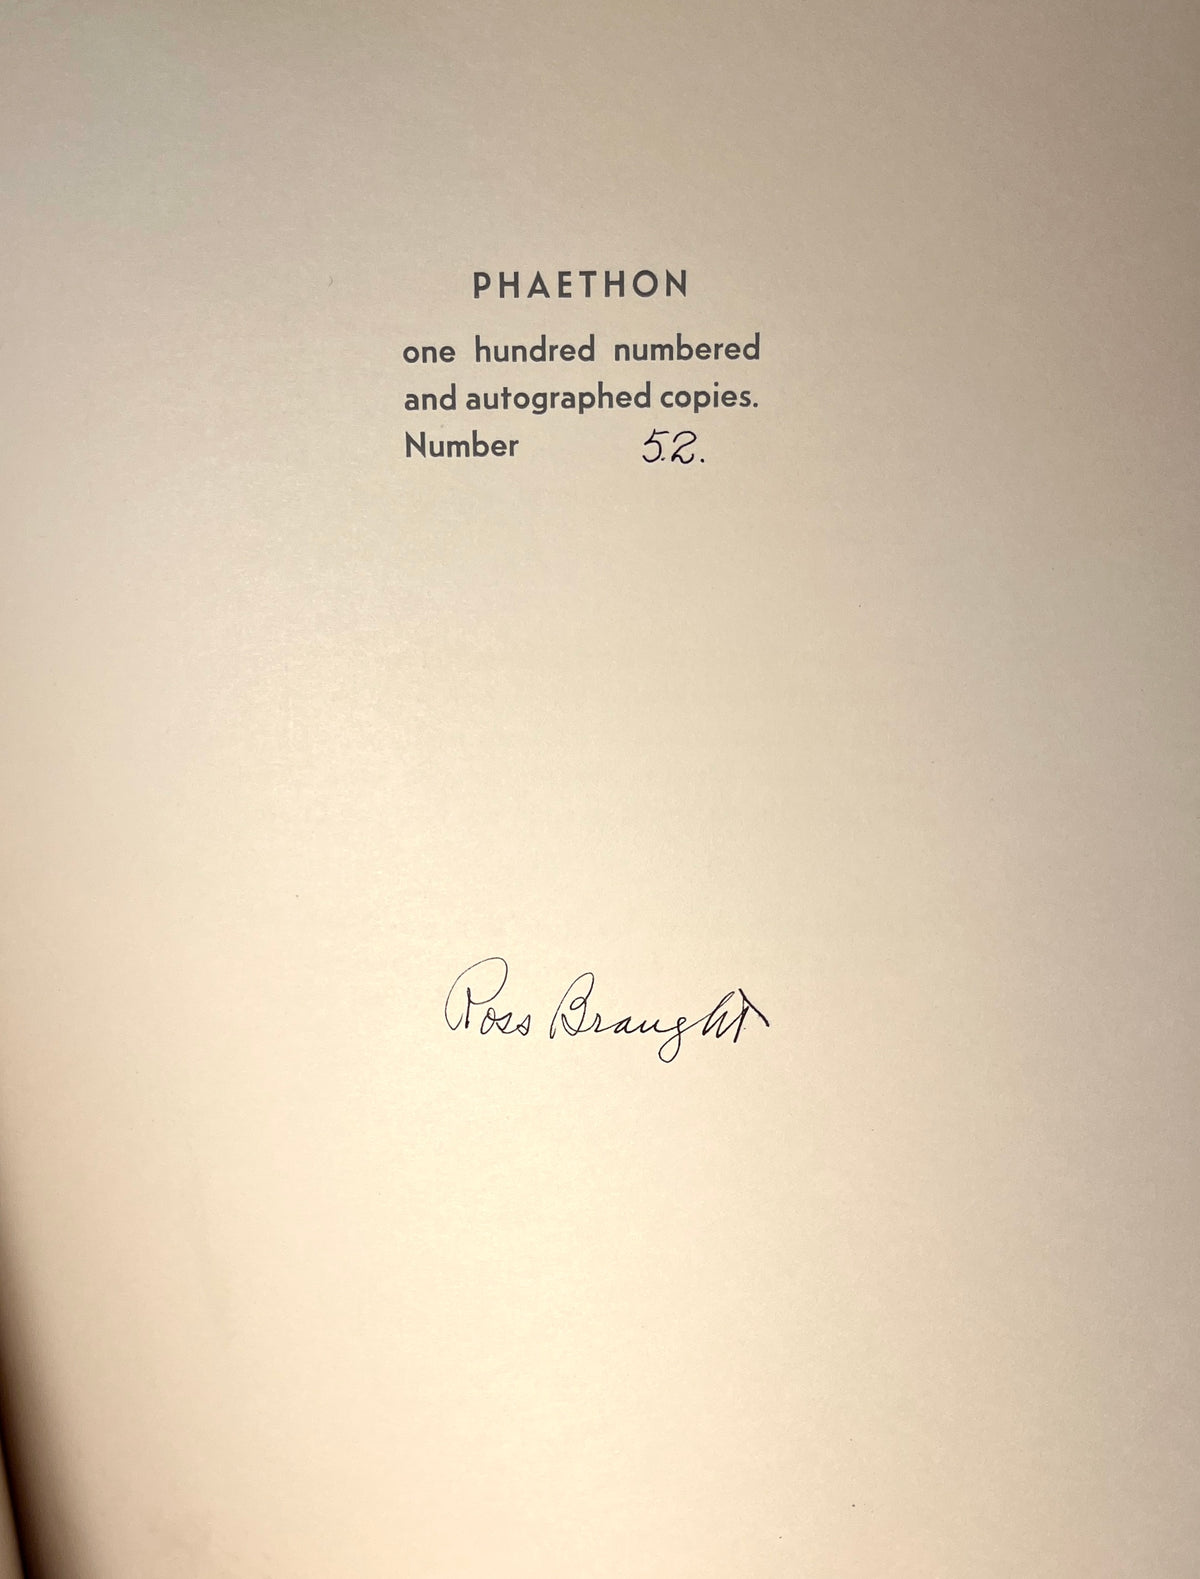 Phaethon, Ovid’s Metamorphosis, illustrated and published by Ross Braught, 1935. SIGNED